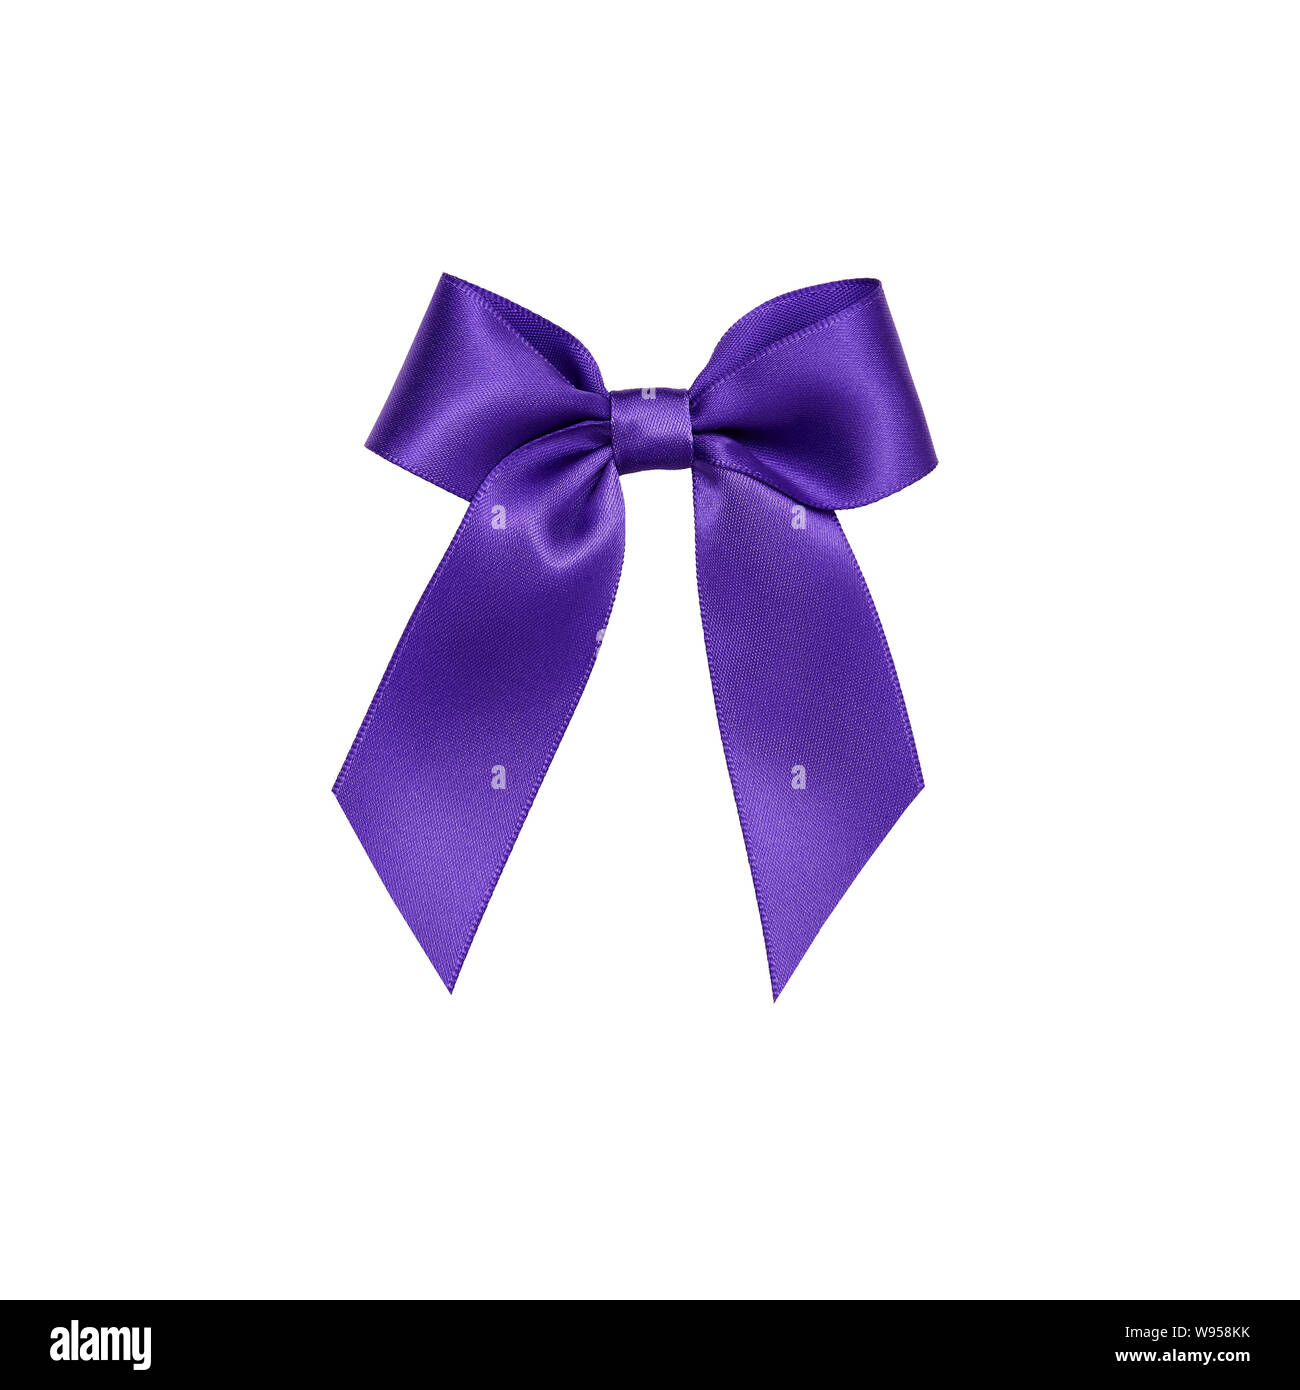 Purple ribbon bow cut out, isolated on white background Stock Photo